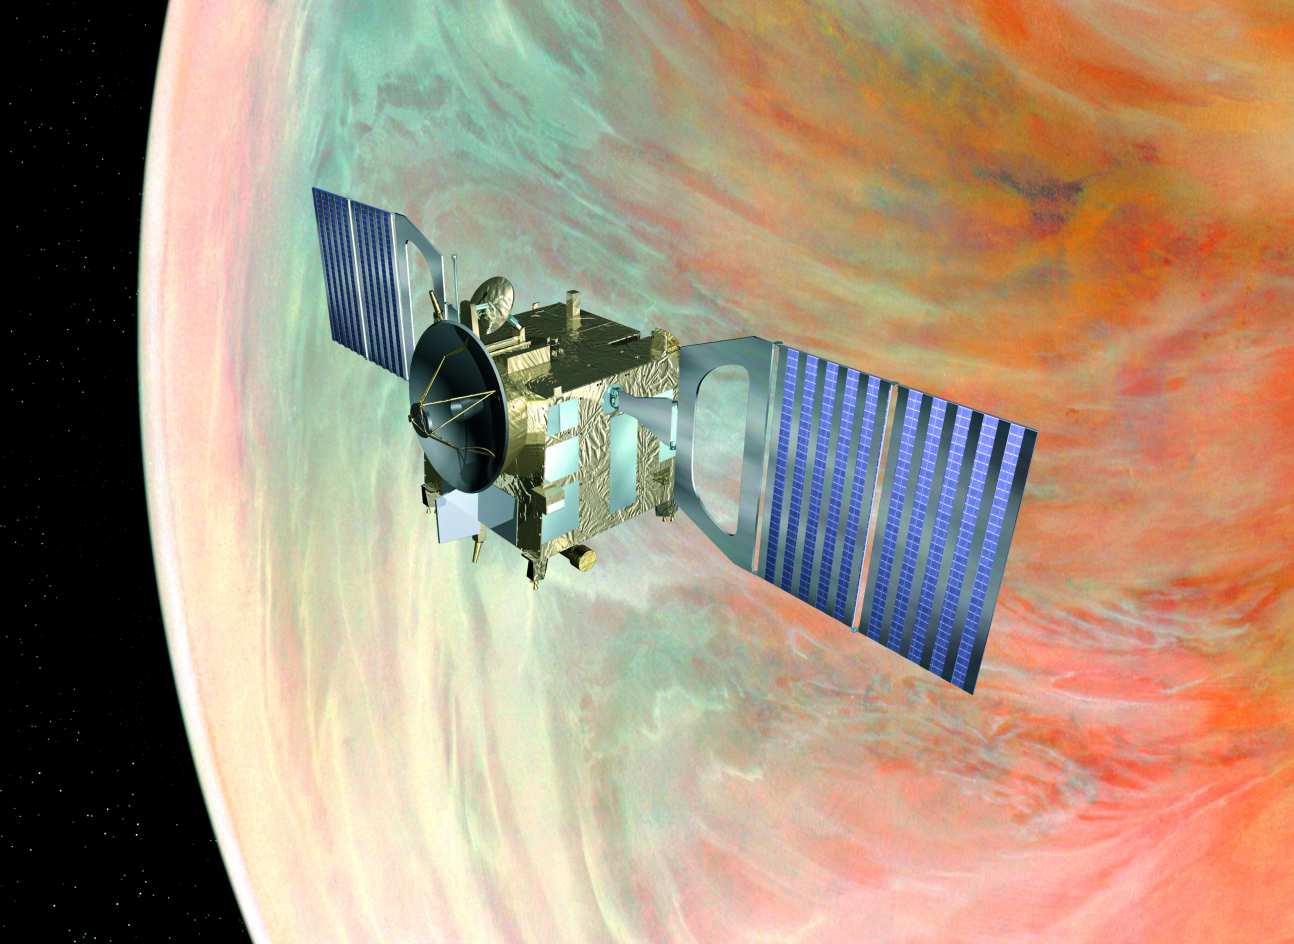 An Artists's Impression of the Spacecraft at Venus (picture credit: ESA)